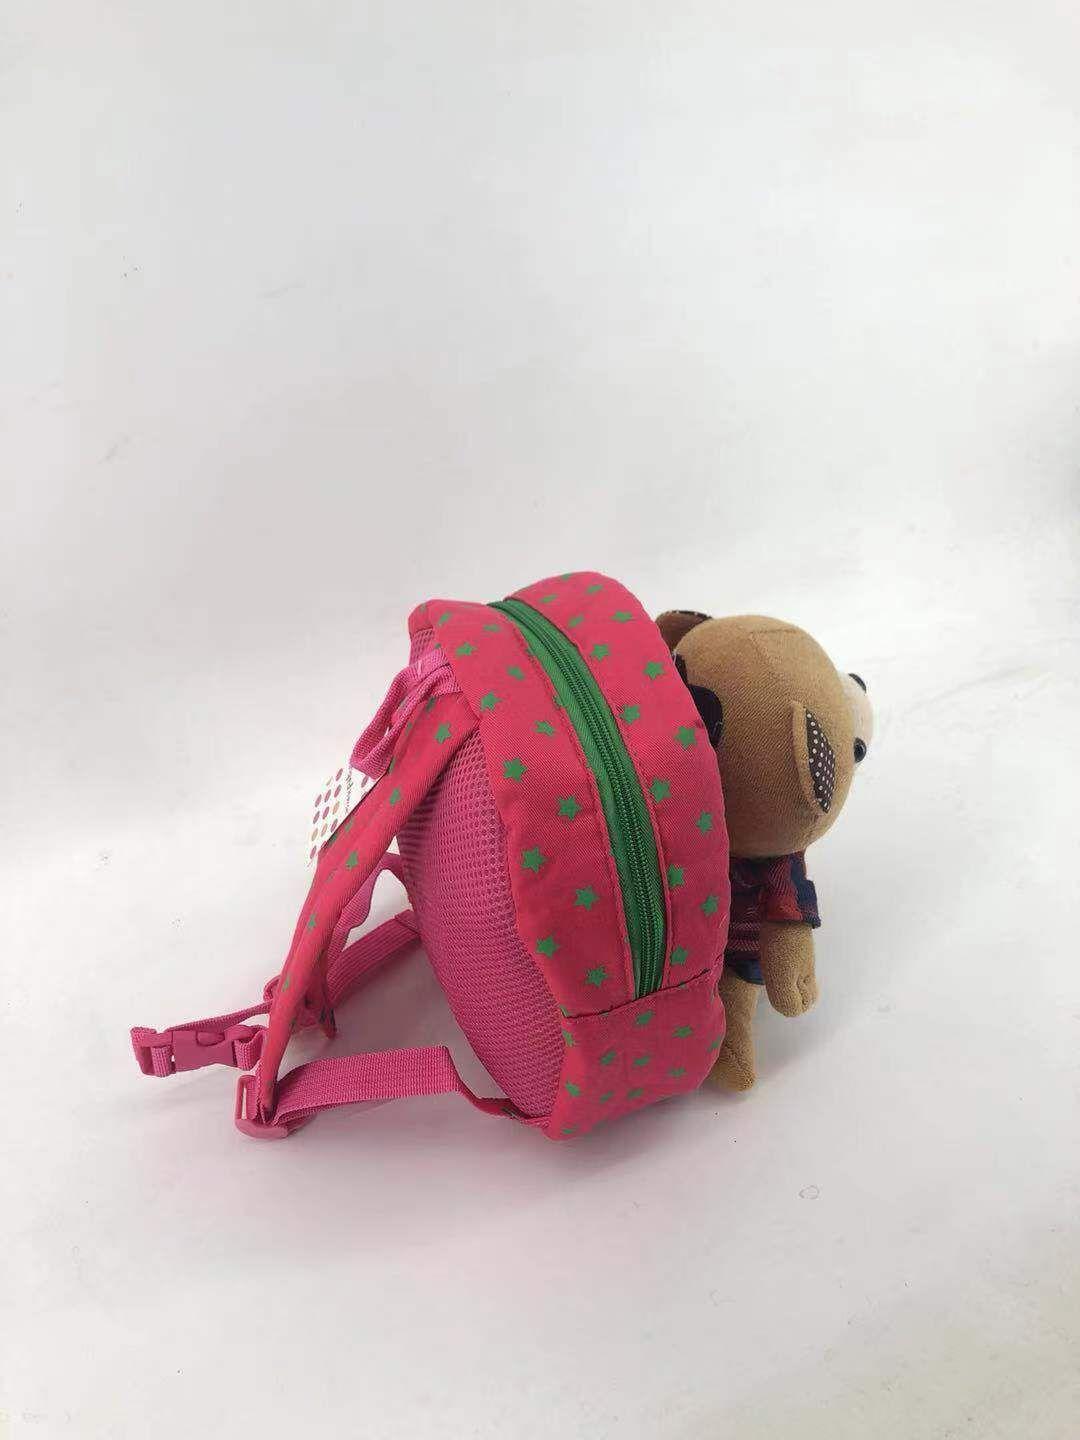 Rucksack with a safety leash - pink